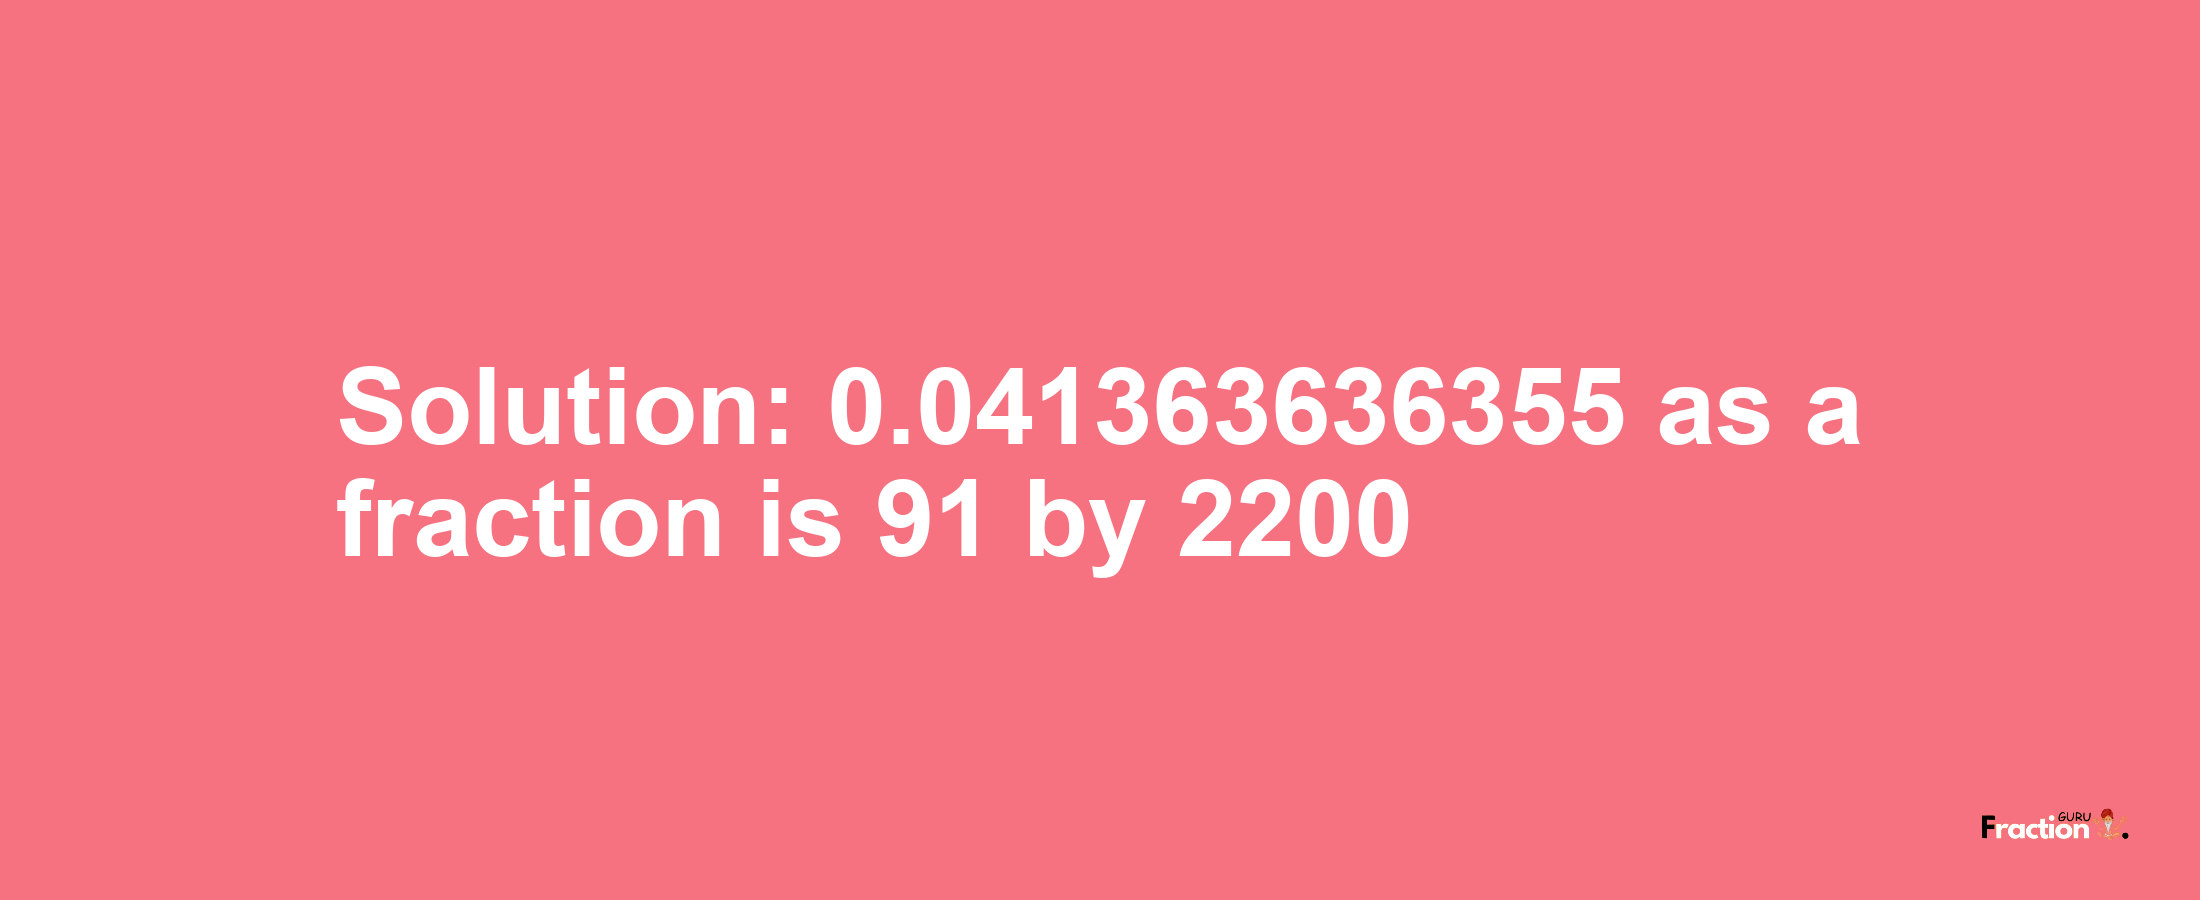 Solution:0.041363636355 as a fraction is 91/2200